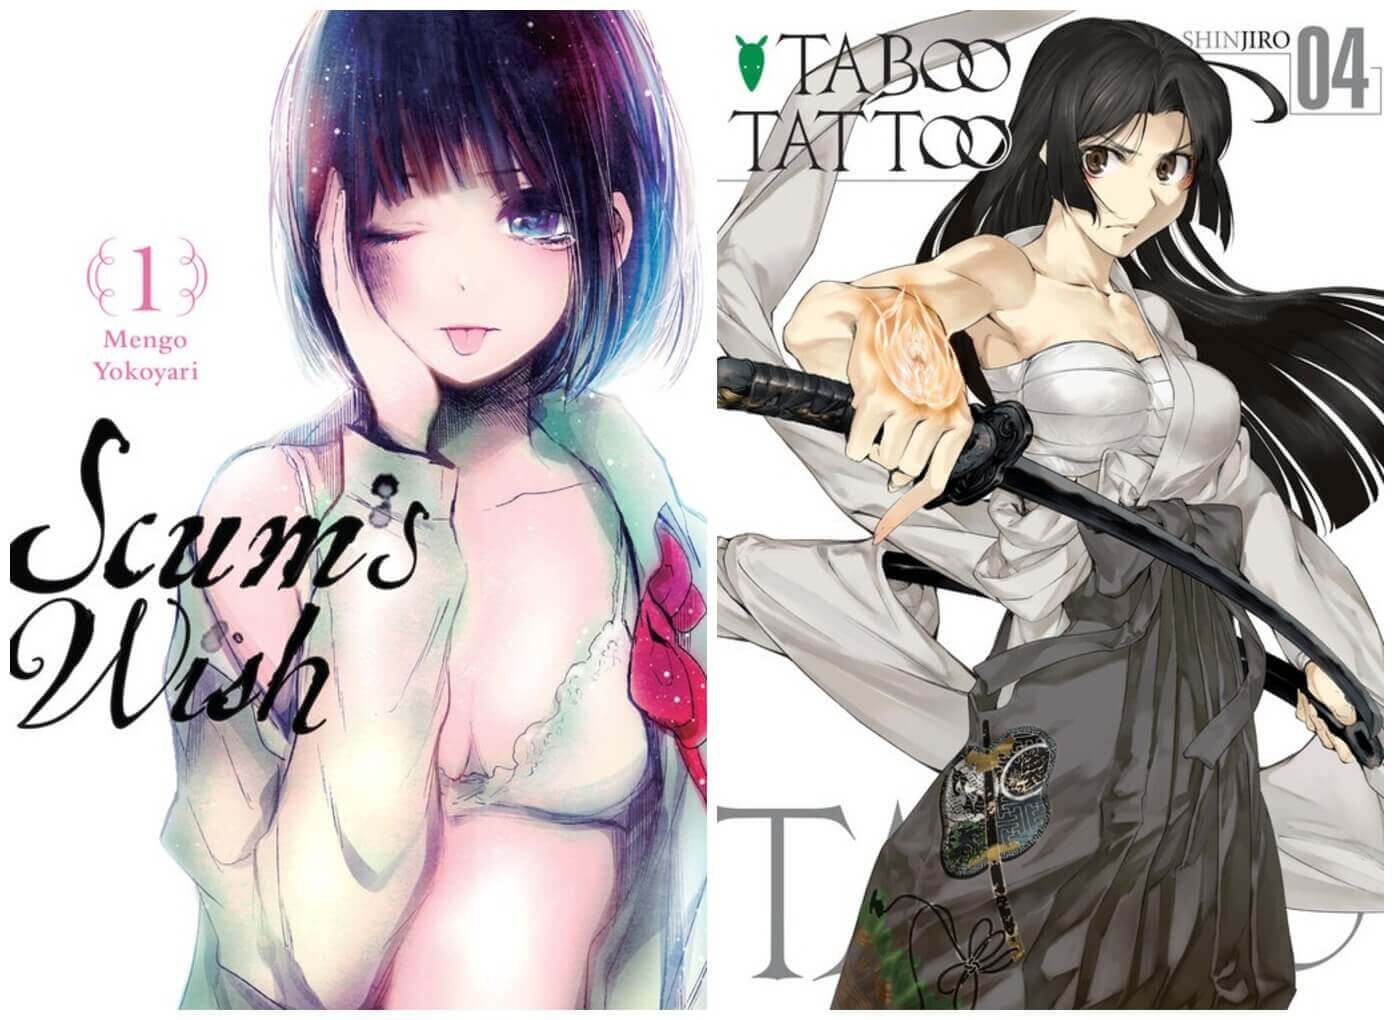 October 2016 Manga Releases Covers for Scum's Wish and Taboo Tattoo.